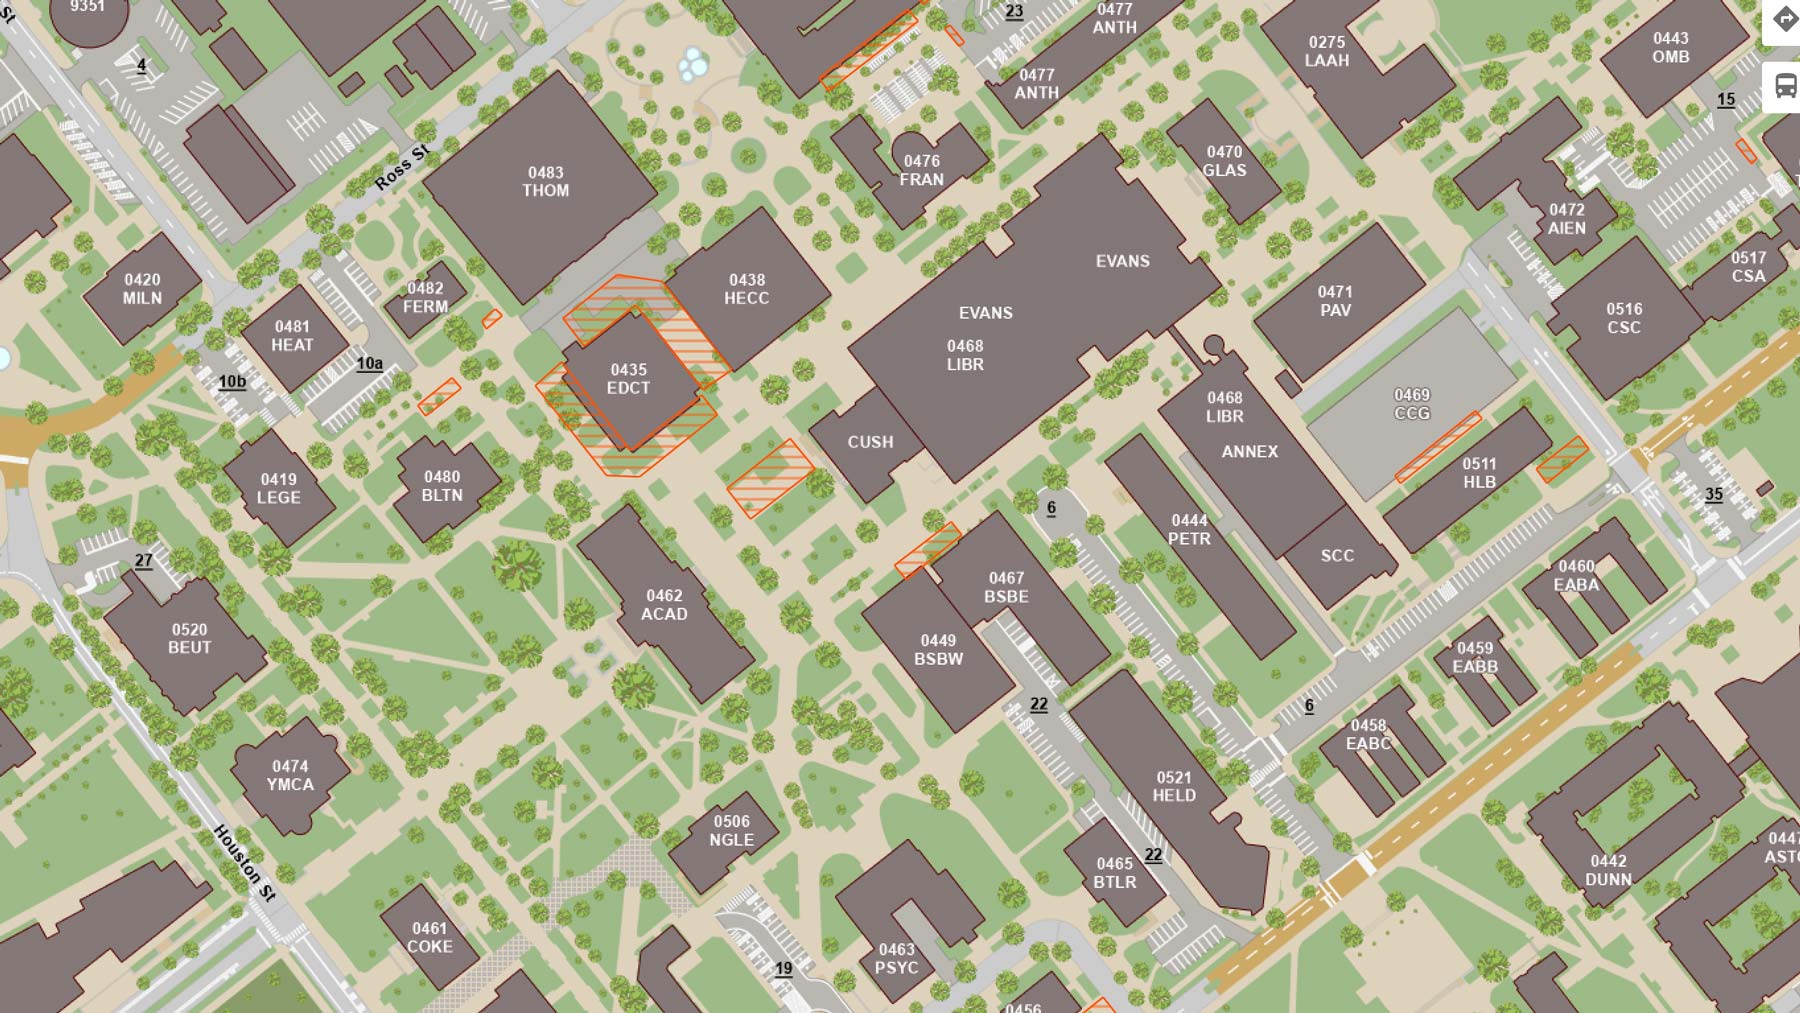 A screenshot of the Aggie Map online app, showing the Academic Building and Evans complex